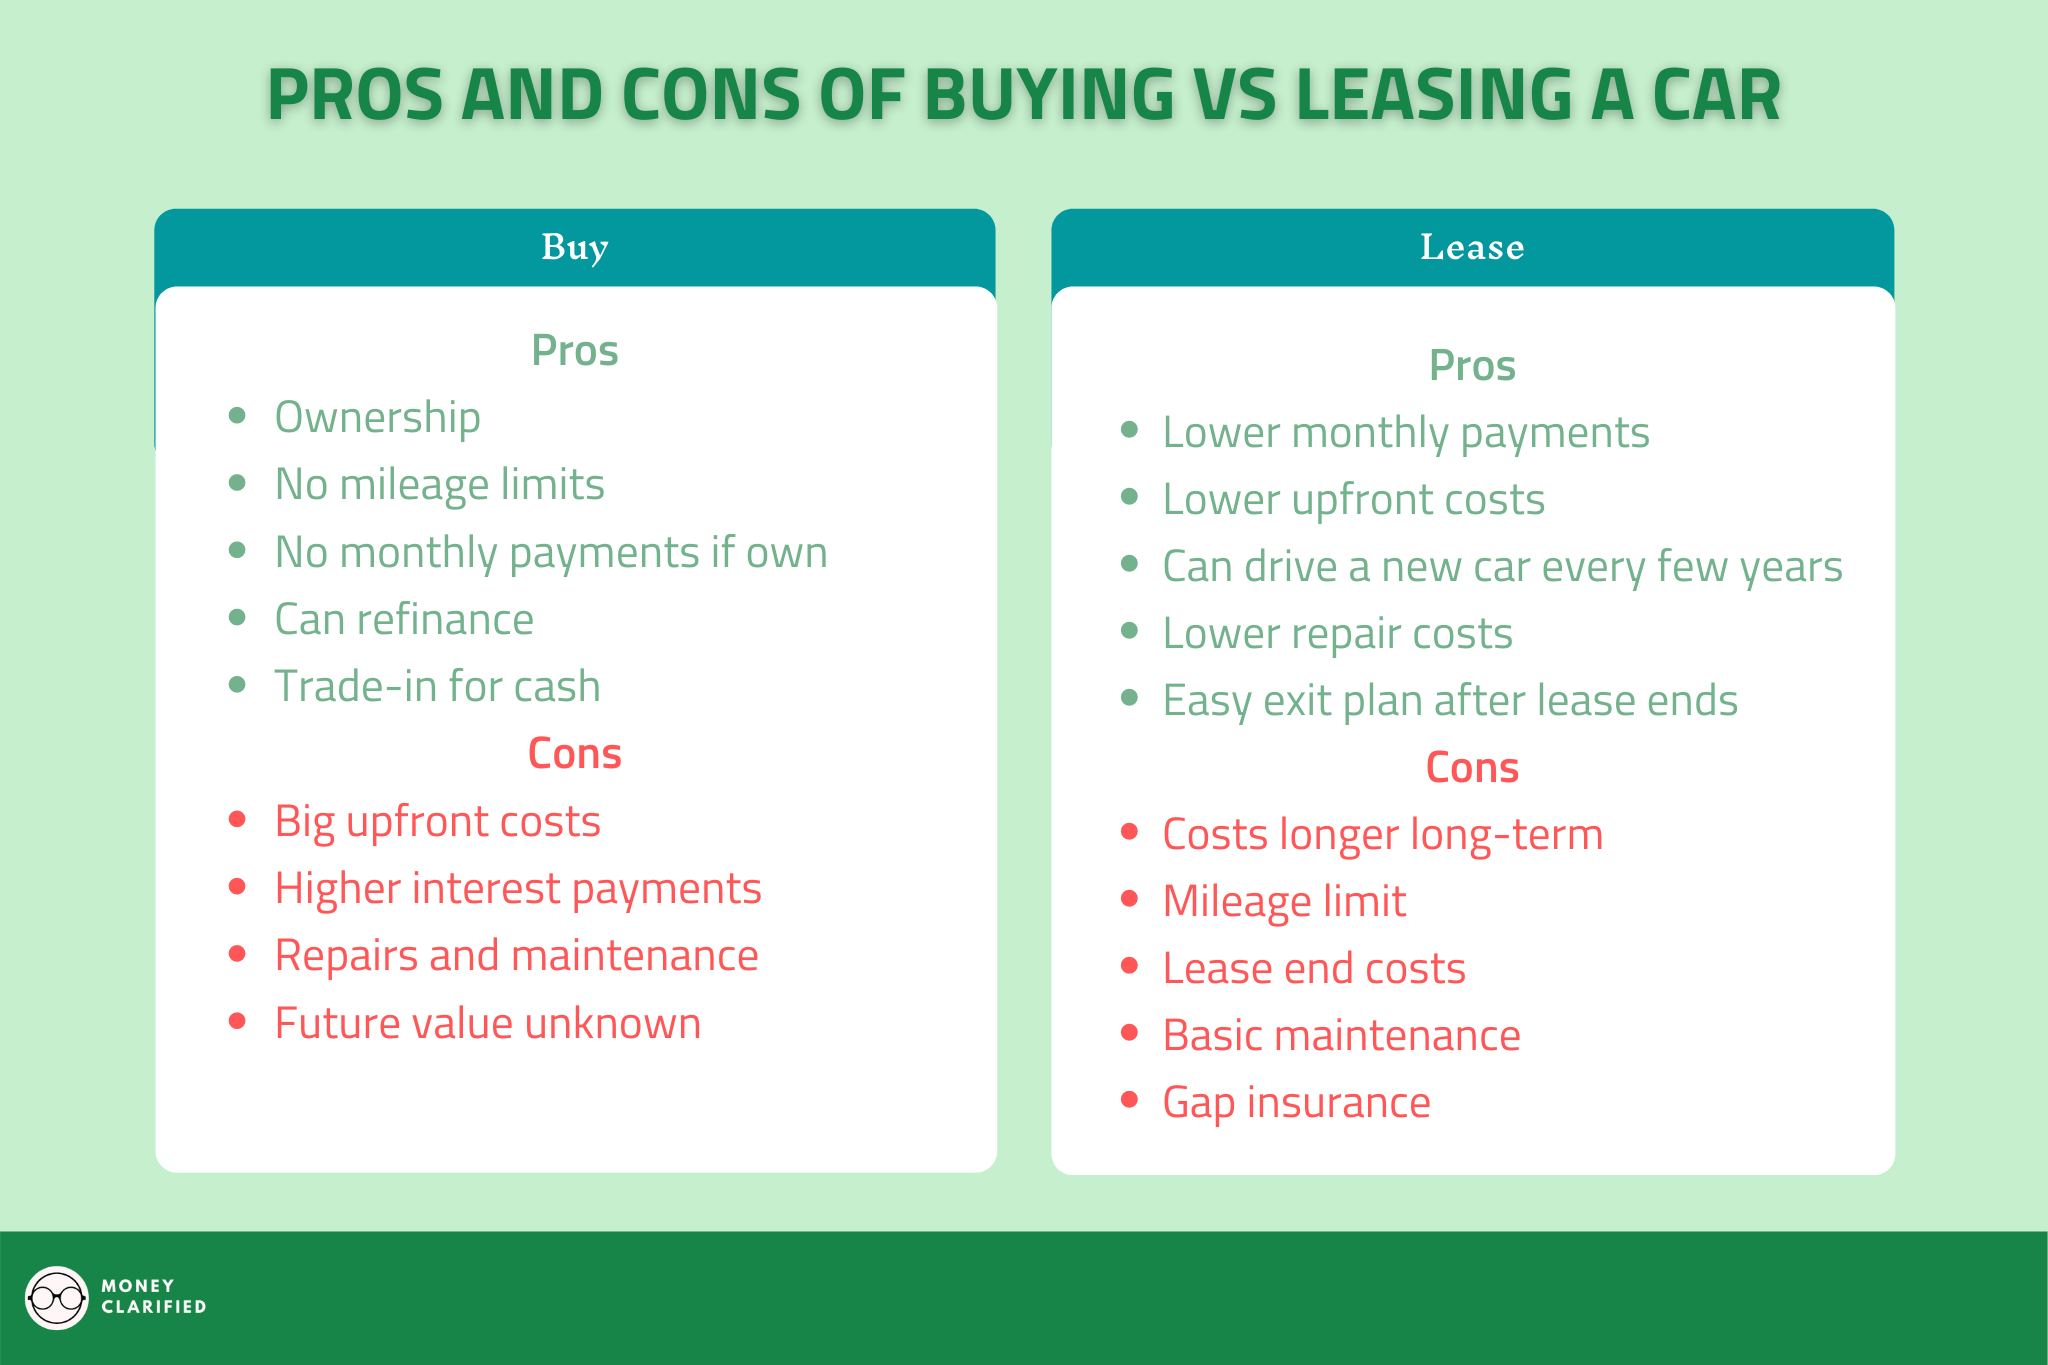 Should You Buy vs Lease A Car? Here Are The Pros and Cons. Money